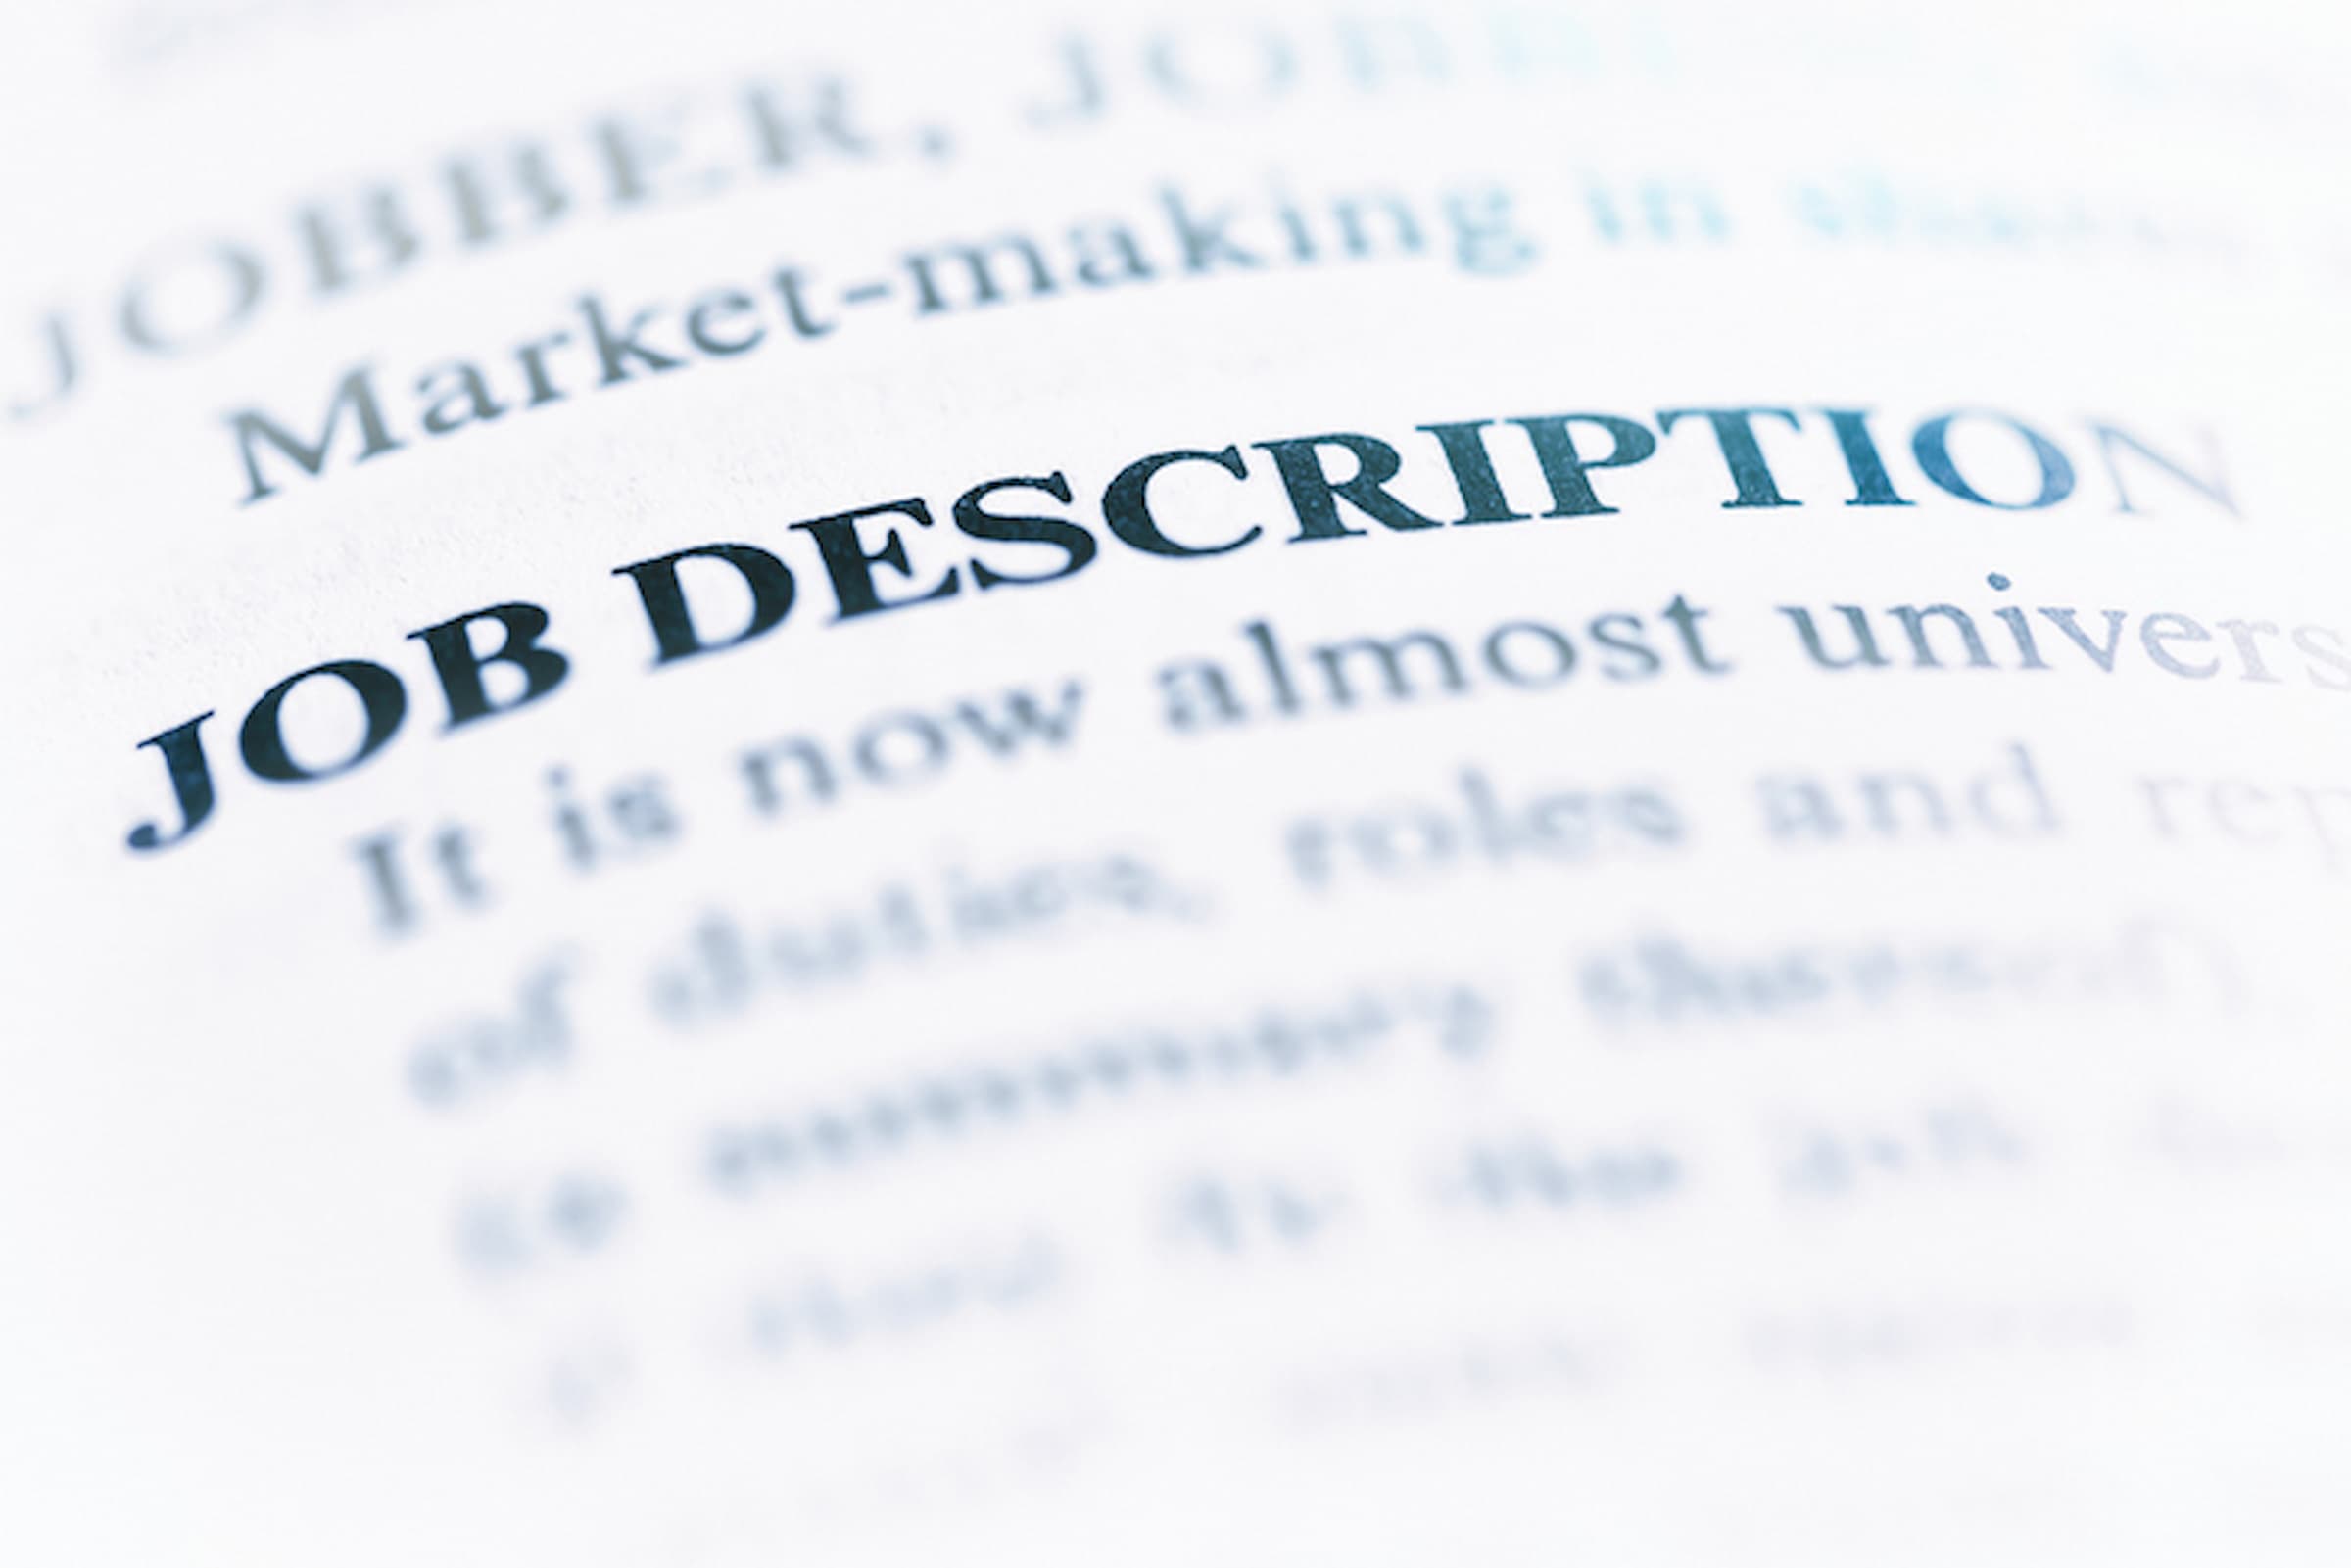 How to Write a Job Description To Attract Top Talent